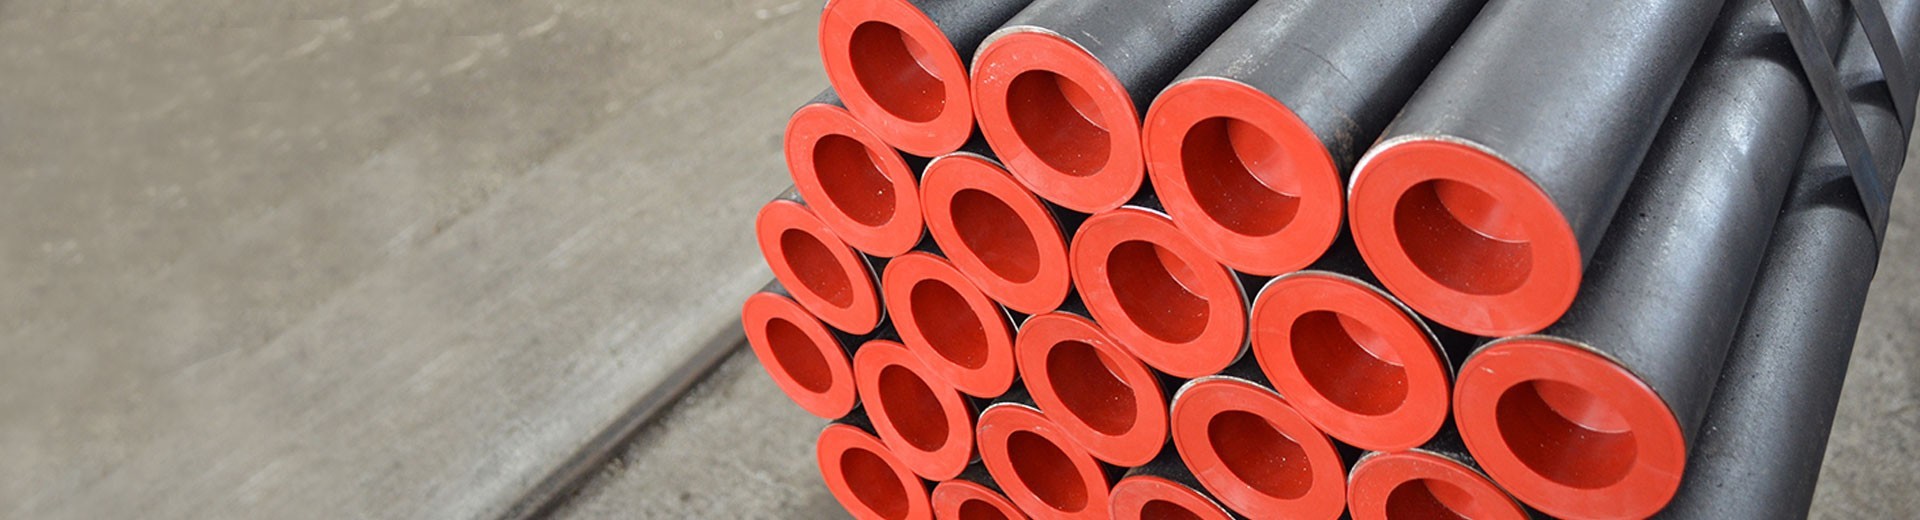 A252 Carbon Steel Pipe